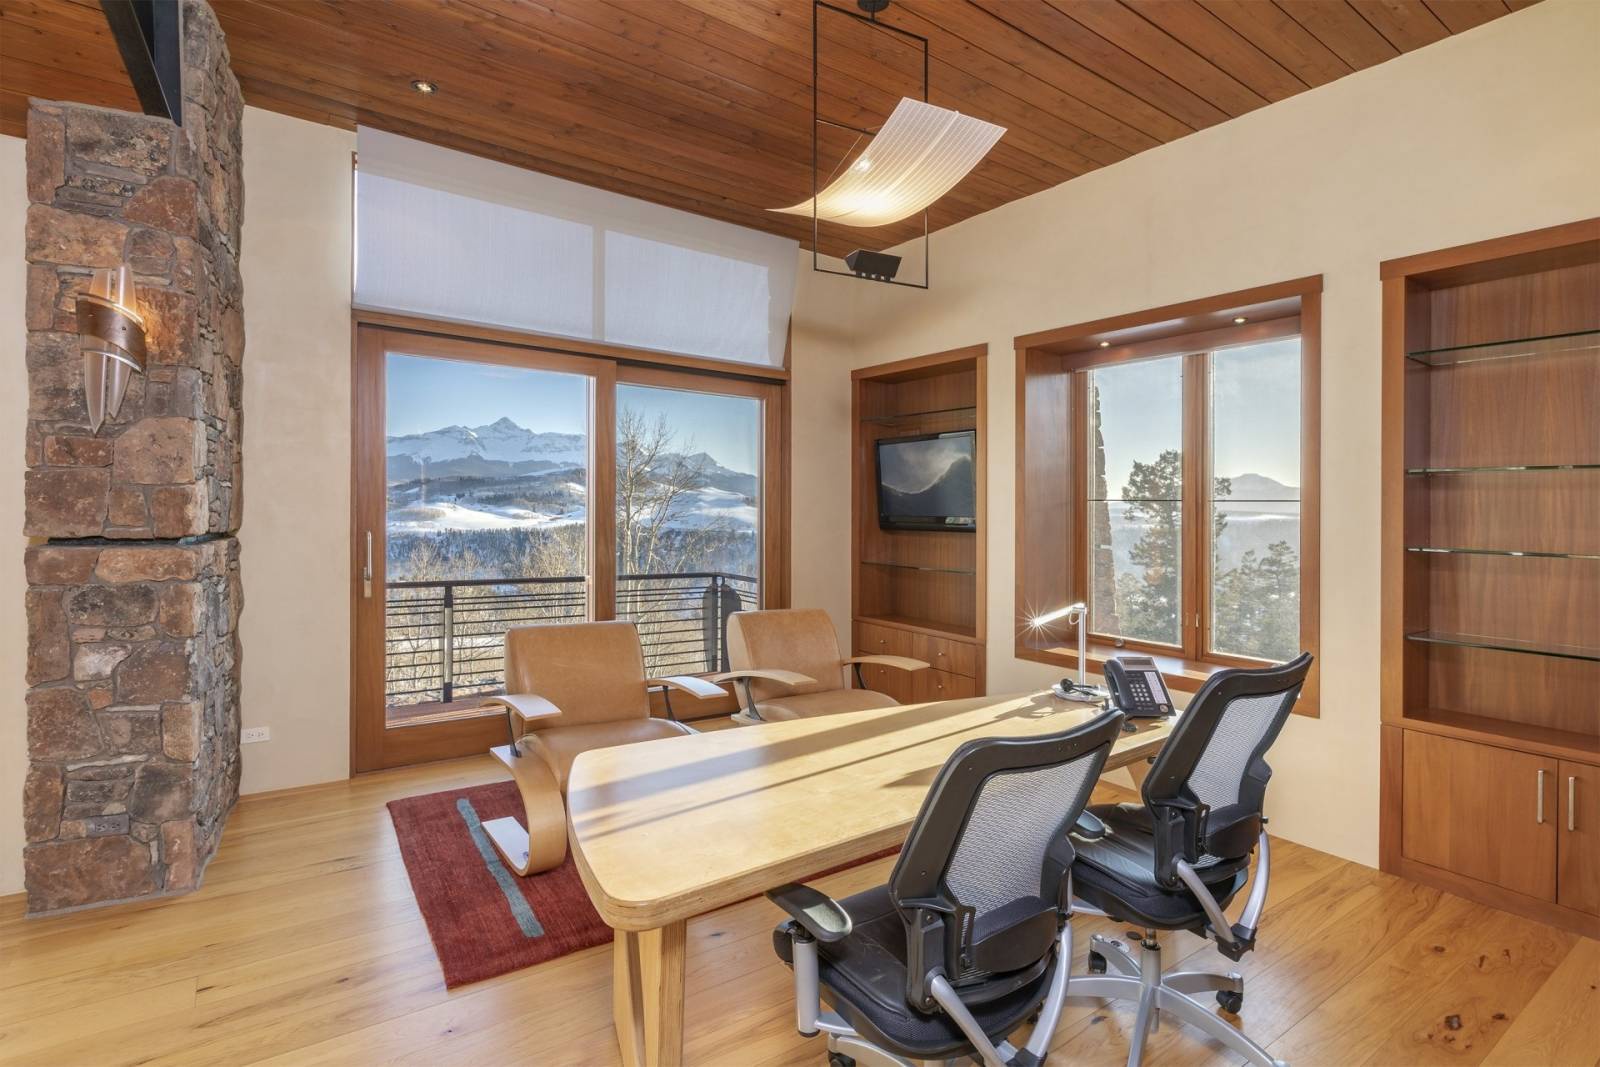 Telluride Vacation Rentals, PaGomo* - The master area provides a separate private office above the room with stellar views along with a privacy nook to catch up on work or just dive into a good book.